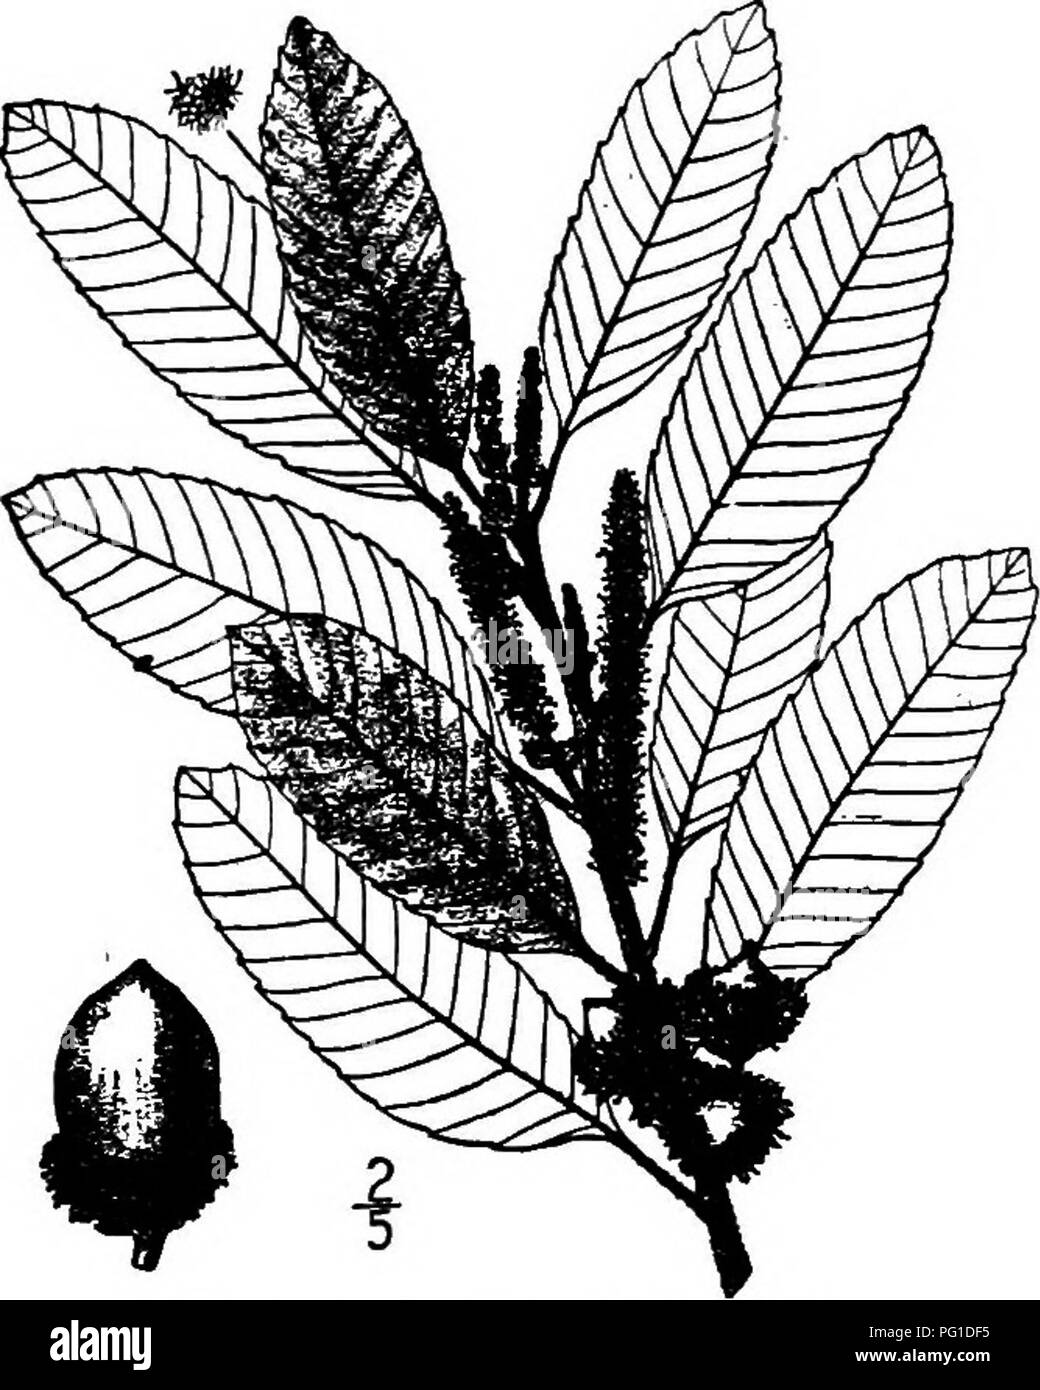 . North American trees : being descriptions and illustrations of the trees growing independently of cultivation in North America, north of Mexico and the West Indies . Trees. 276 Tan Bark Oak The bark is very rich in tannin and is one of the principal tan barks of the Pacific States.' The genus contains about 25 species, mostly natives of southeastern Asia and the Malay region. Castanopsis sempervirens (Kellogg) Dudley, a shrub of higher altitudes in California and Nevada, was long confused with this tree, which often assumes shrubby forms. The generic name is Greek, in allusion to the resembl Stock Photo